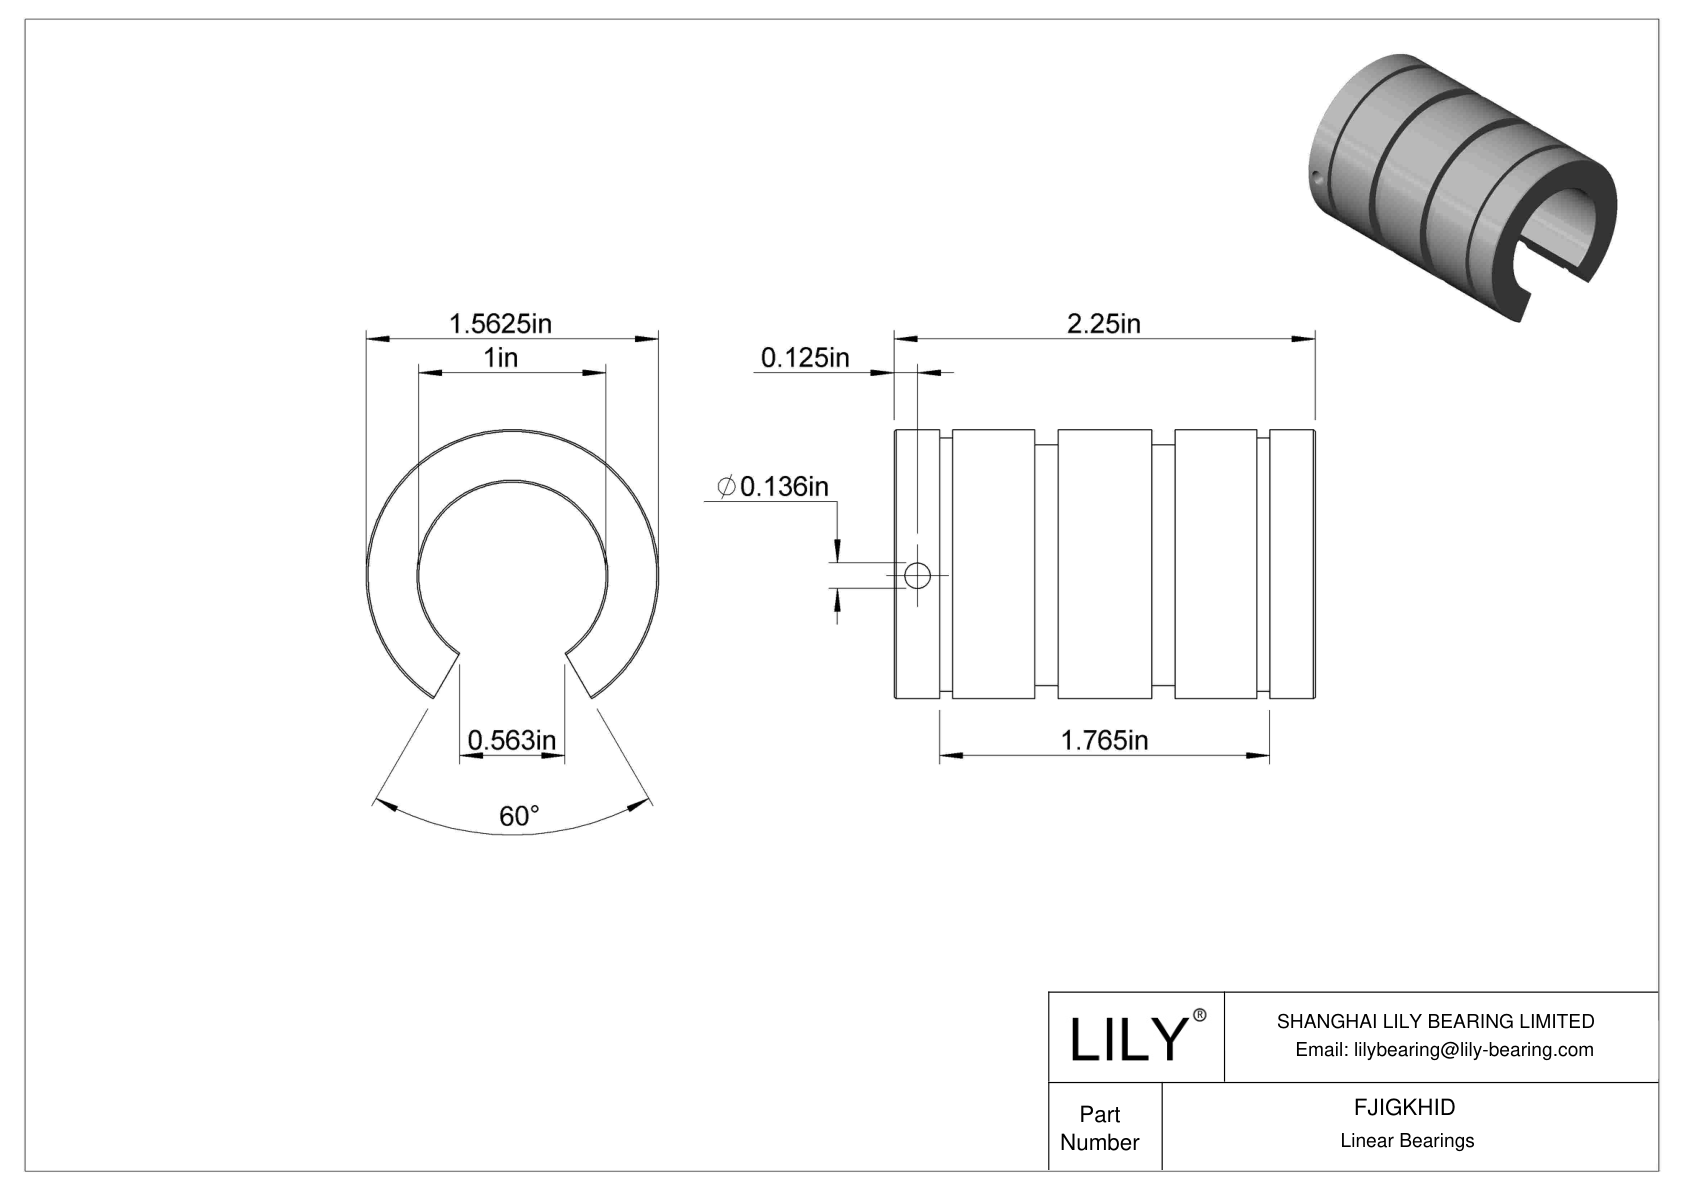 FJIGKHID Common Linear Sleeve Bearings for Support Rail Shafts cad drawing